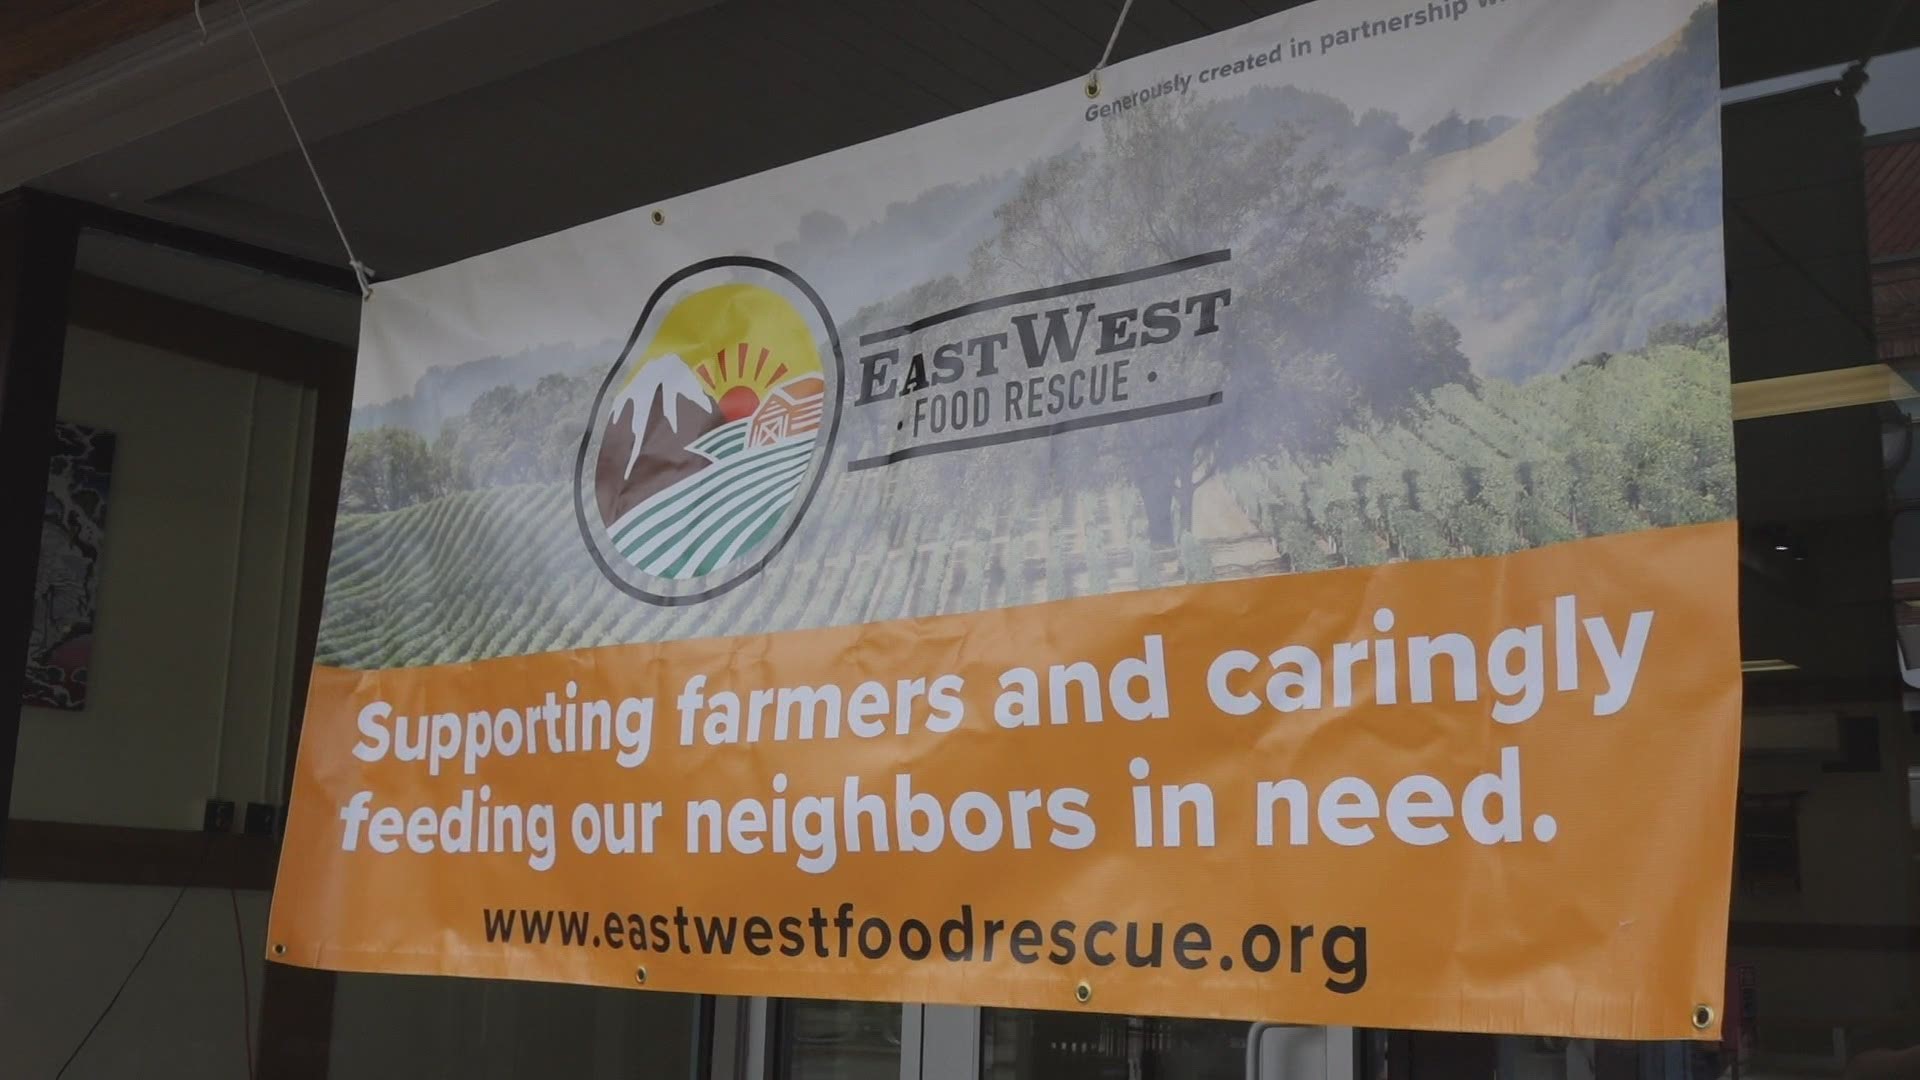 When restaurants closed, farmers suddenly had more crops than they knew what to do with. The EastWest Food Rescue program brought that food to hungry people.